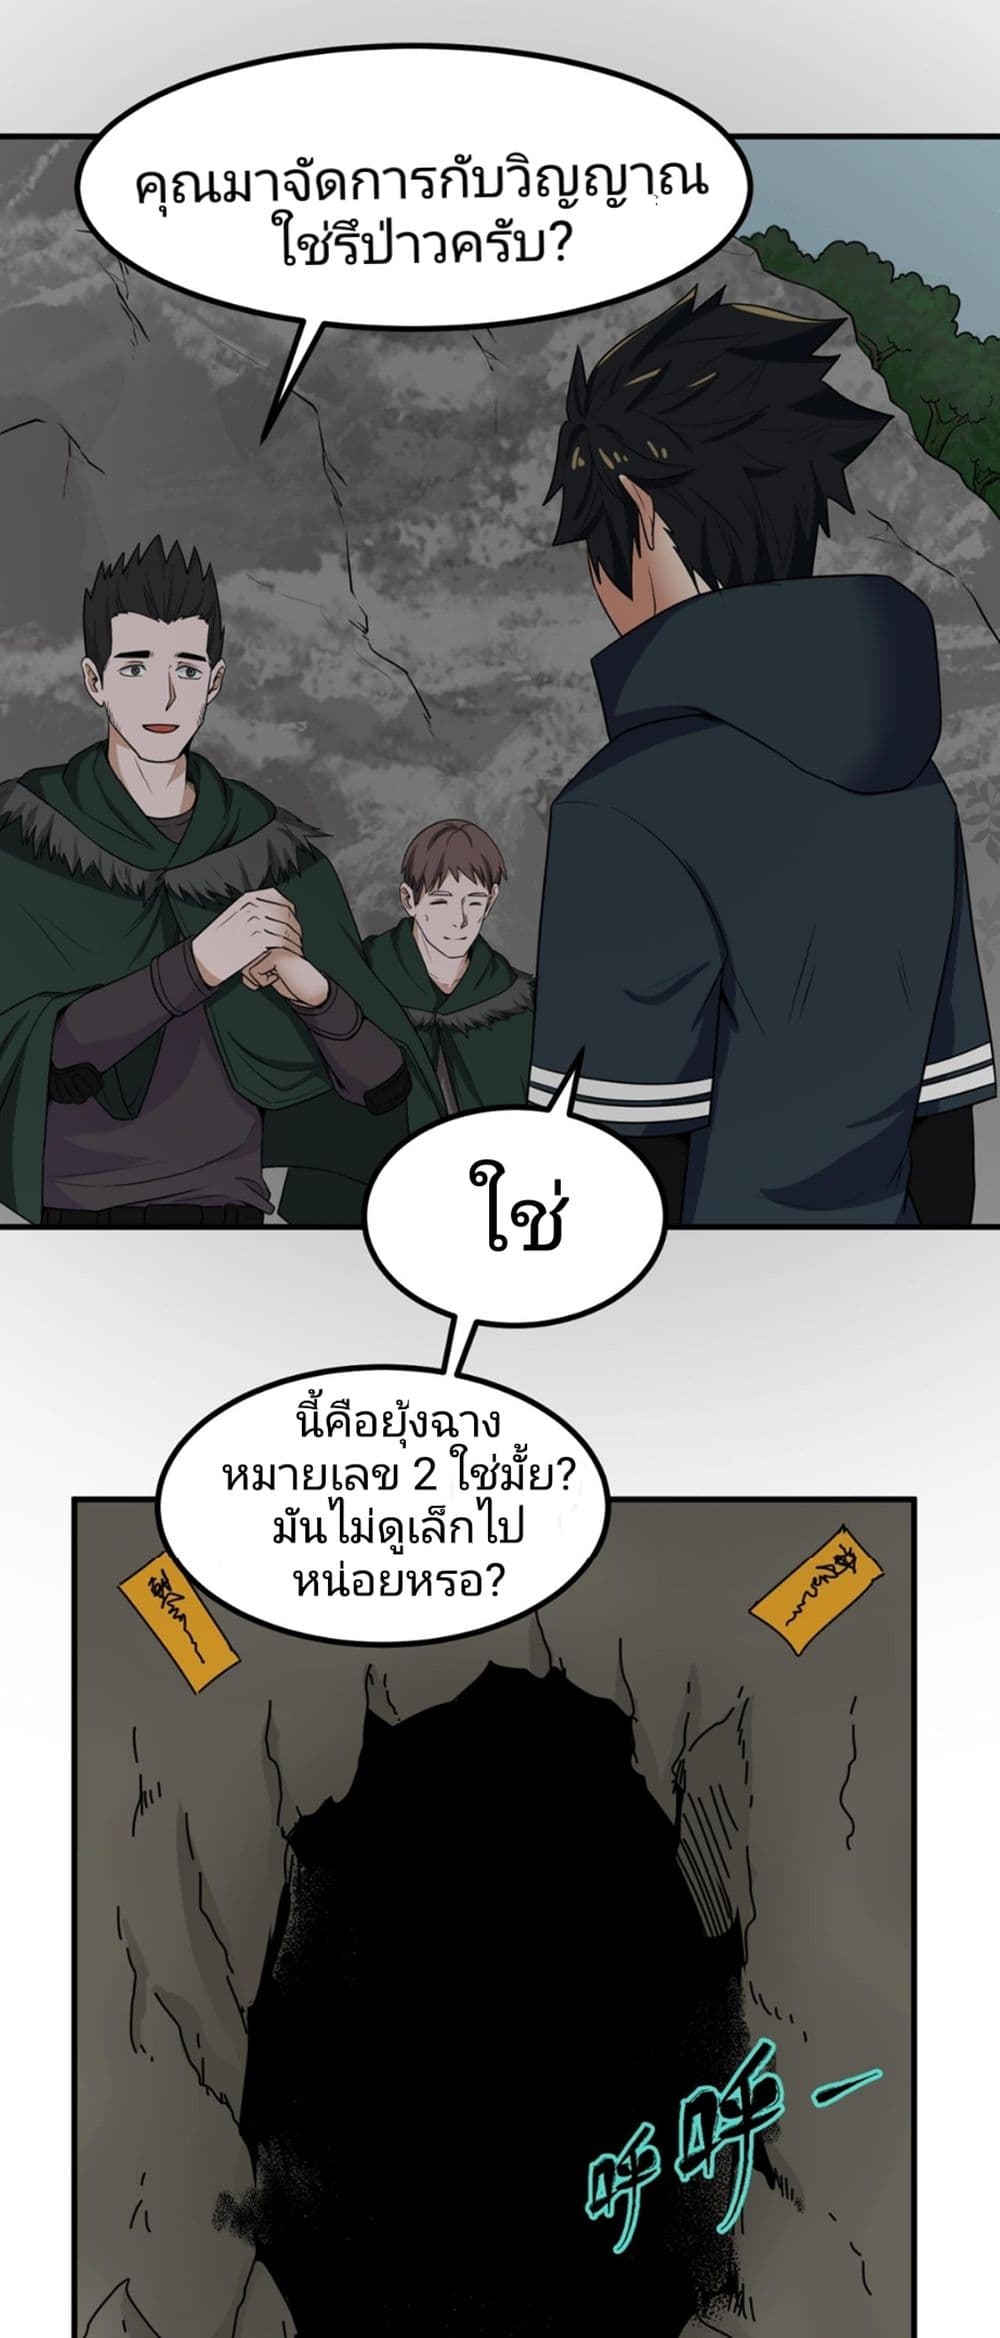 The Age of Ghost Spirits à¸à¸­à¸à¸à¸µà¹ 6 (34)